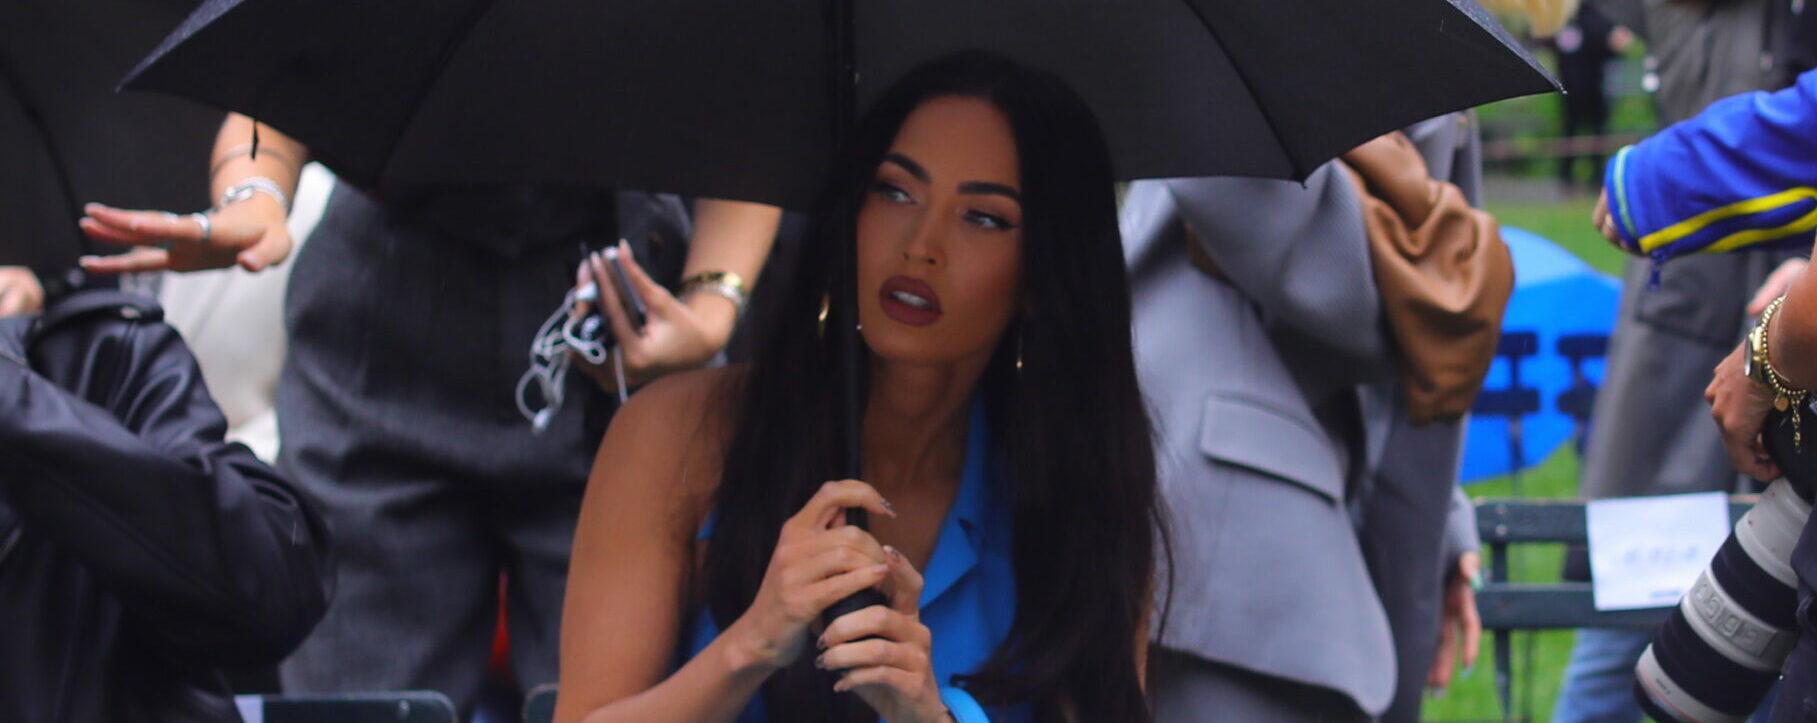 Megan Fox stuns in blue as she stares into the cameras while holding an umbrella in the rain during the Moschino fashion show held outside during fashion week in NYC